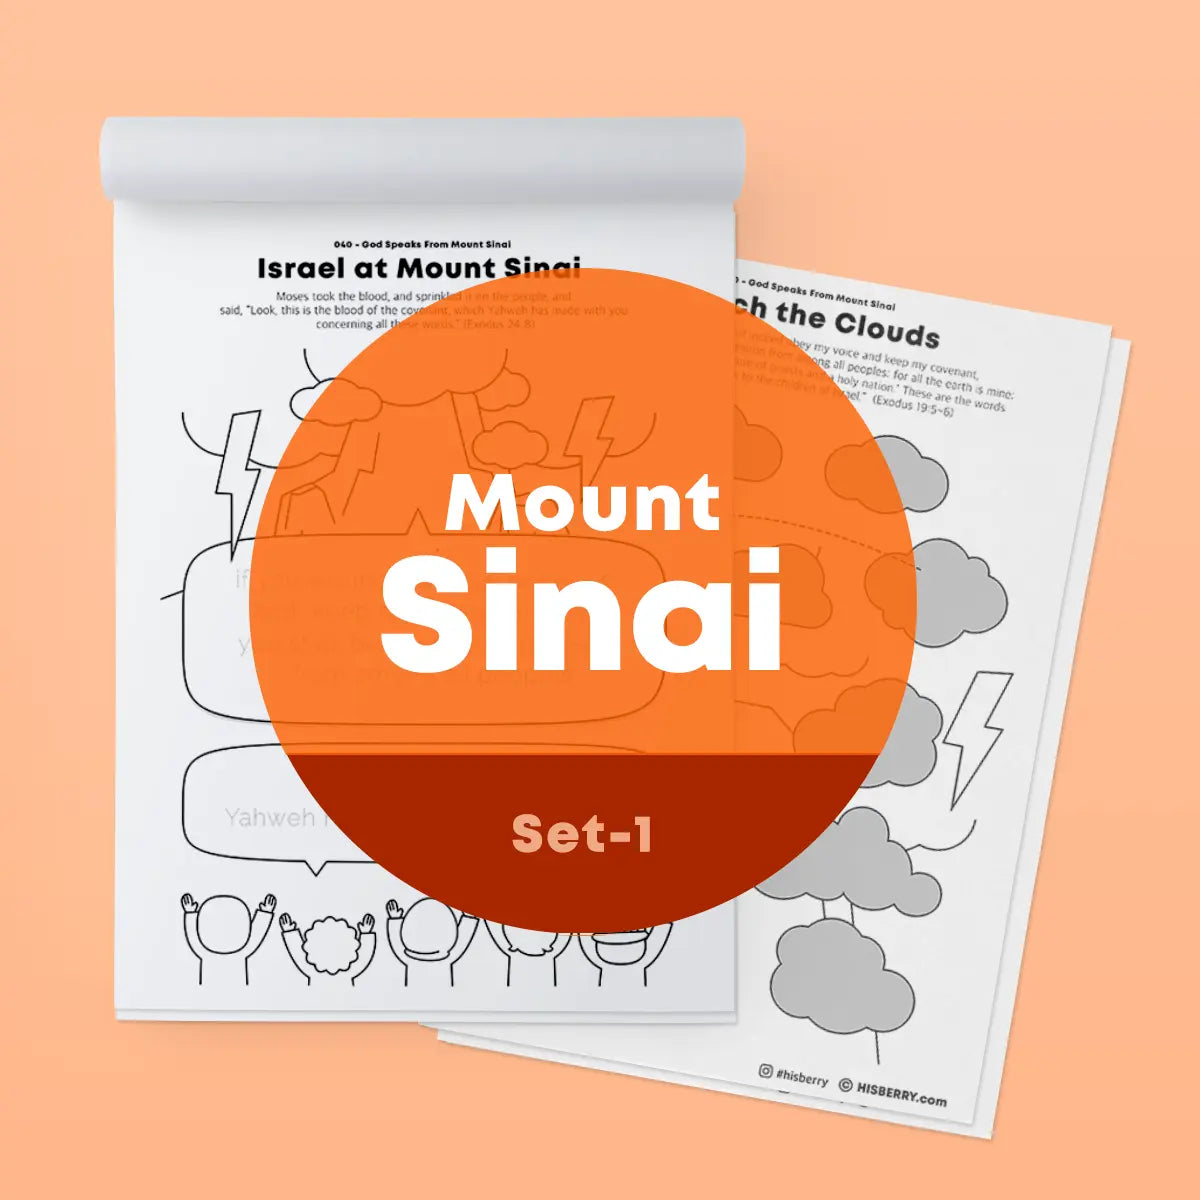 god-speaks-from-mount-sinai-activity-worksheets-bible-lesson-for-kids